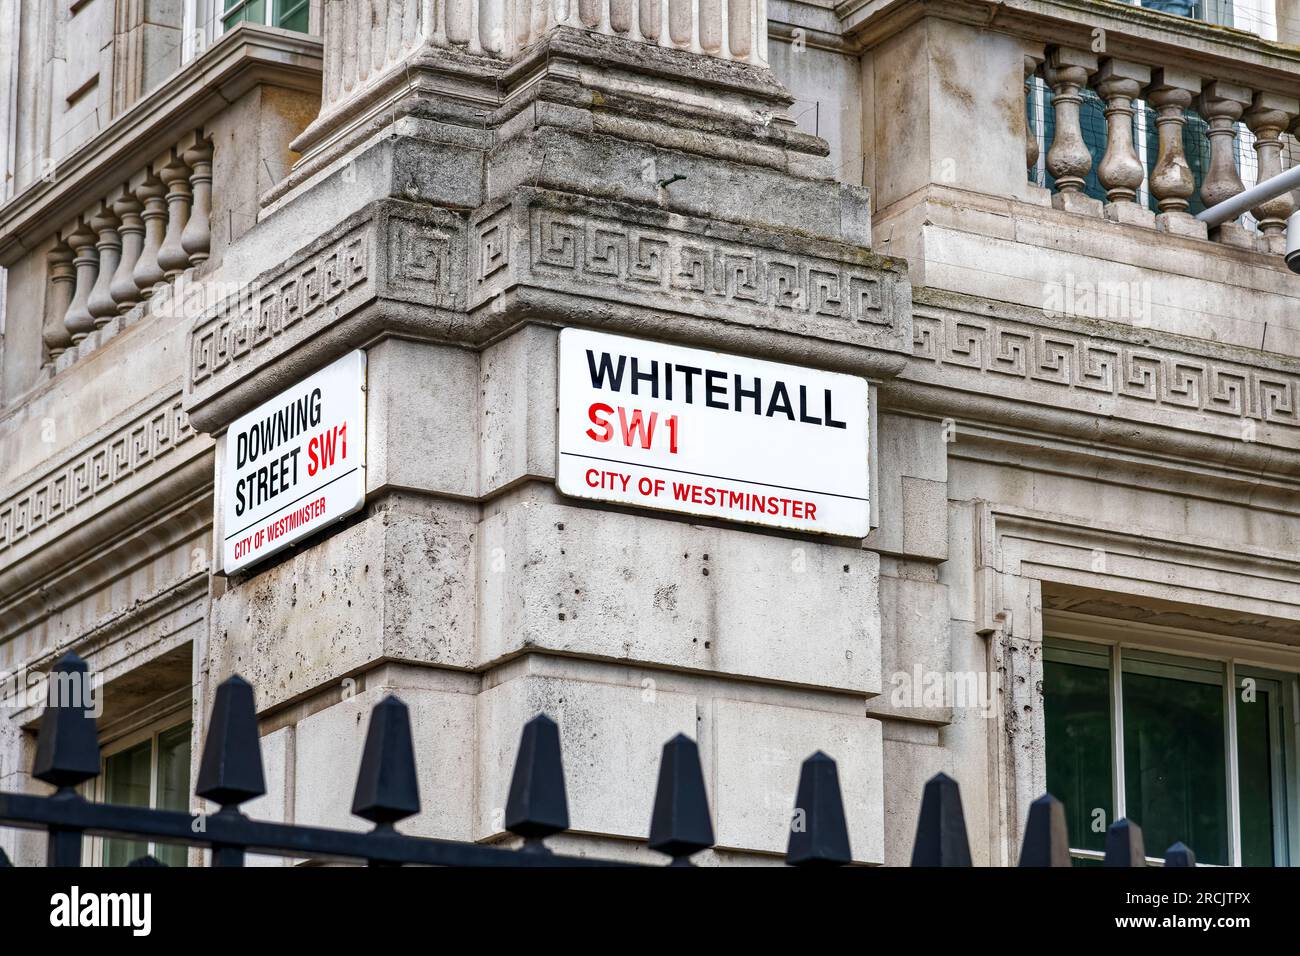 Downing Street e Whitehall, cartello stradale, City of westminster, London,SW1, England, REGNO UNITO Foto Stock